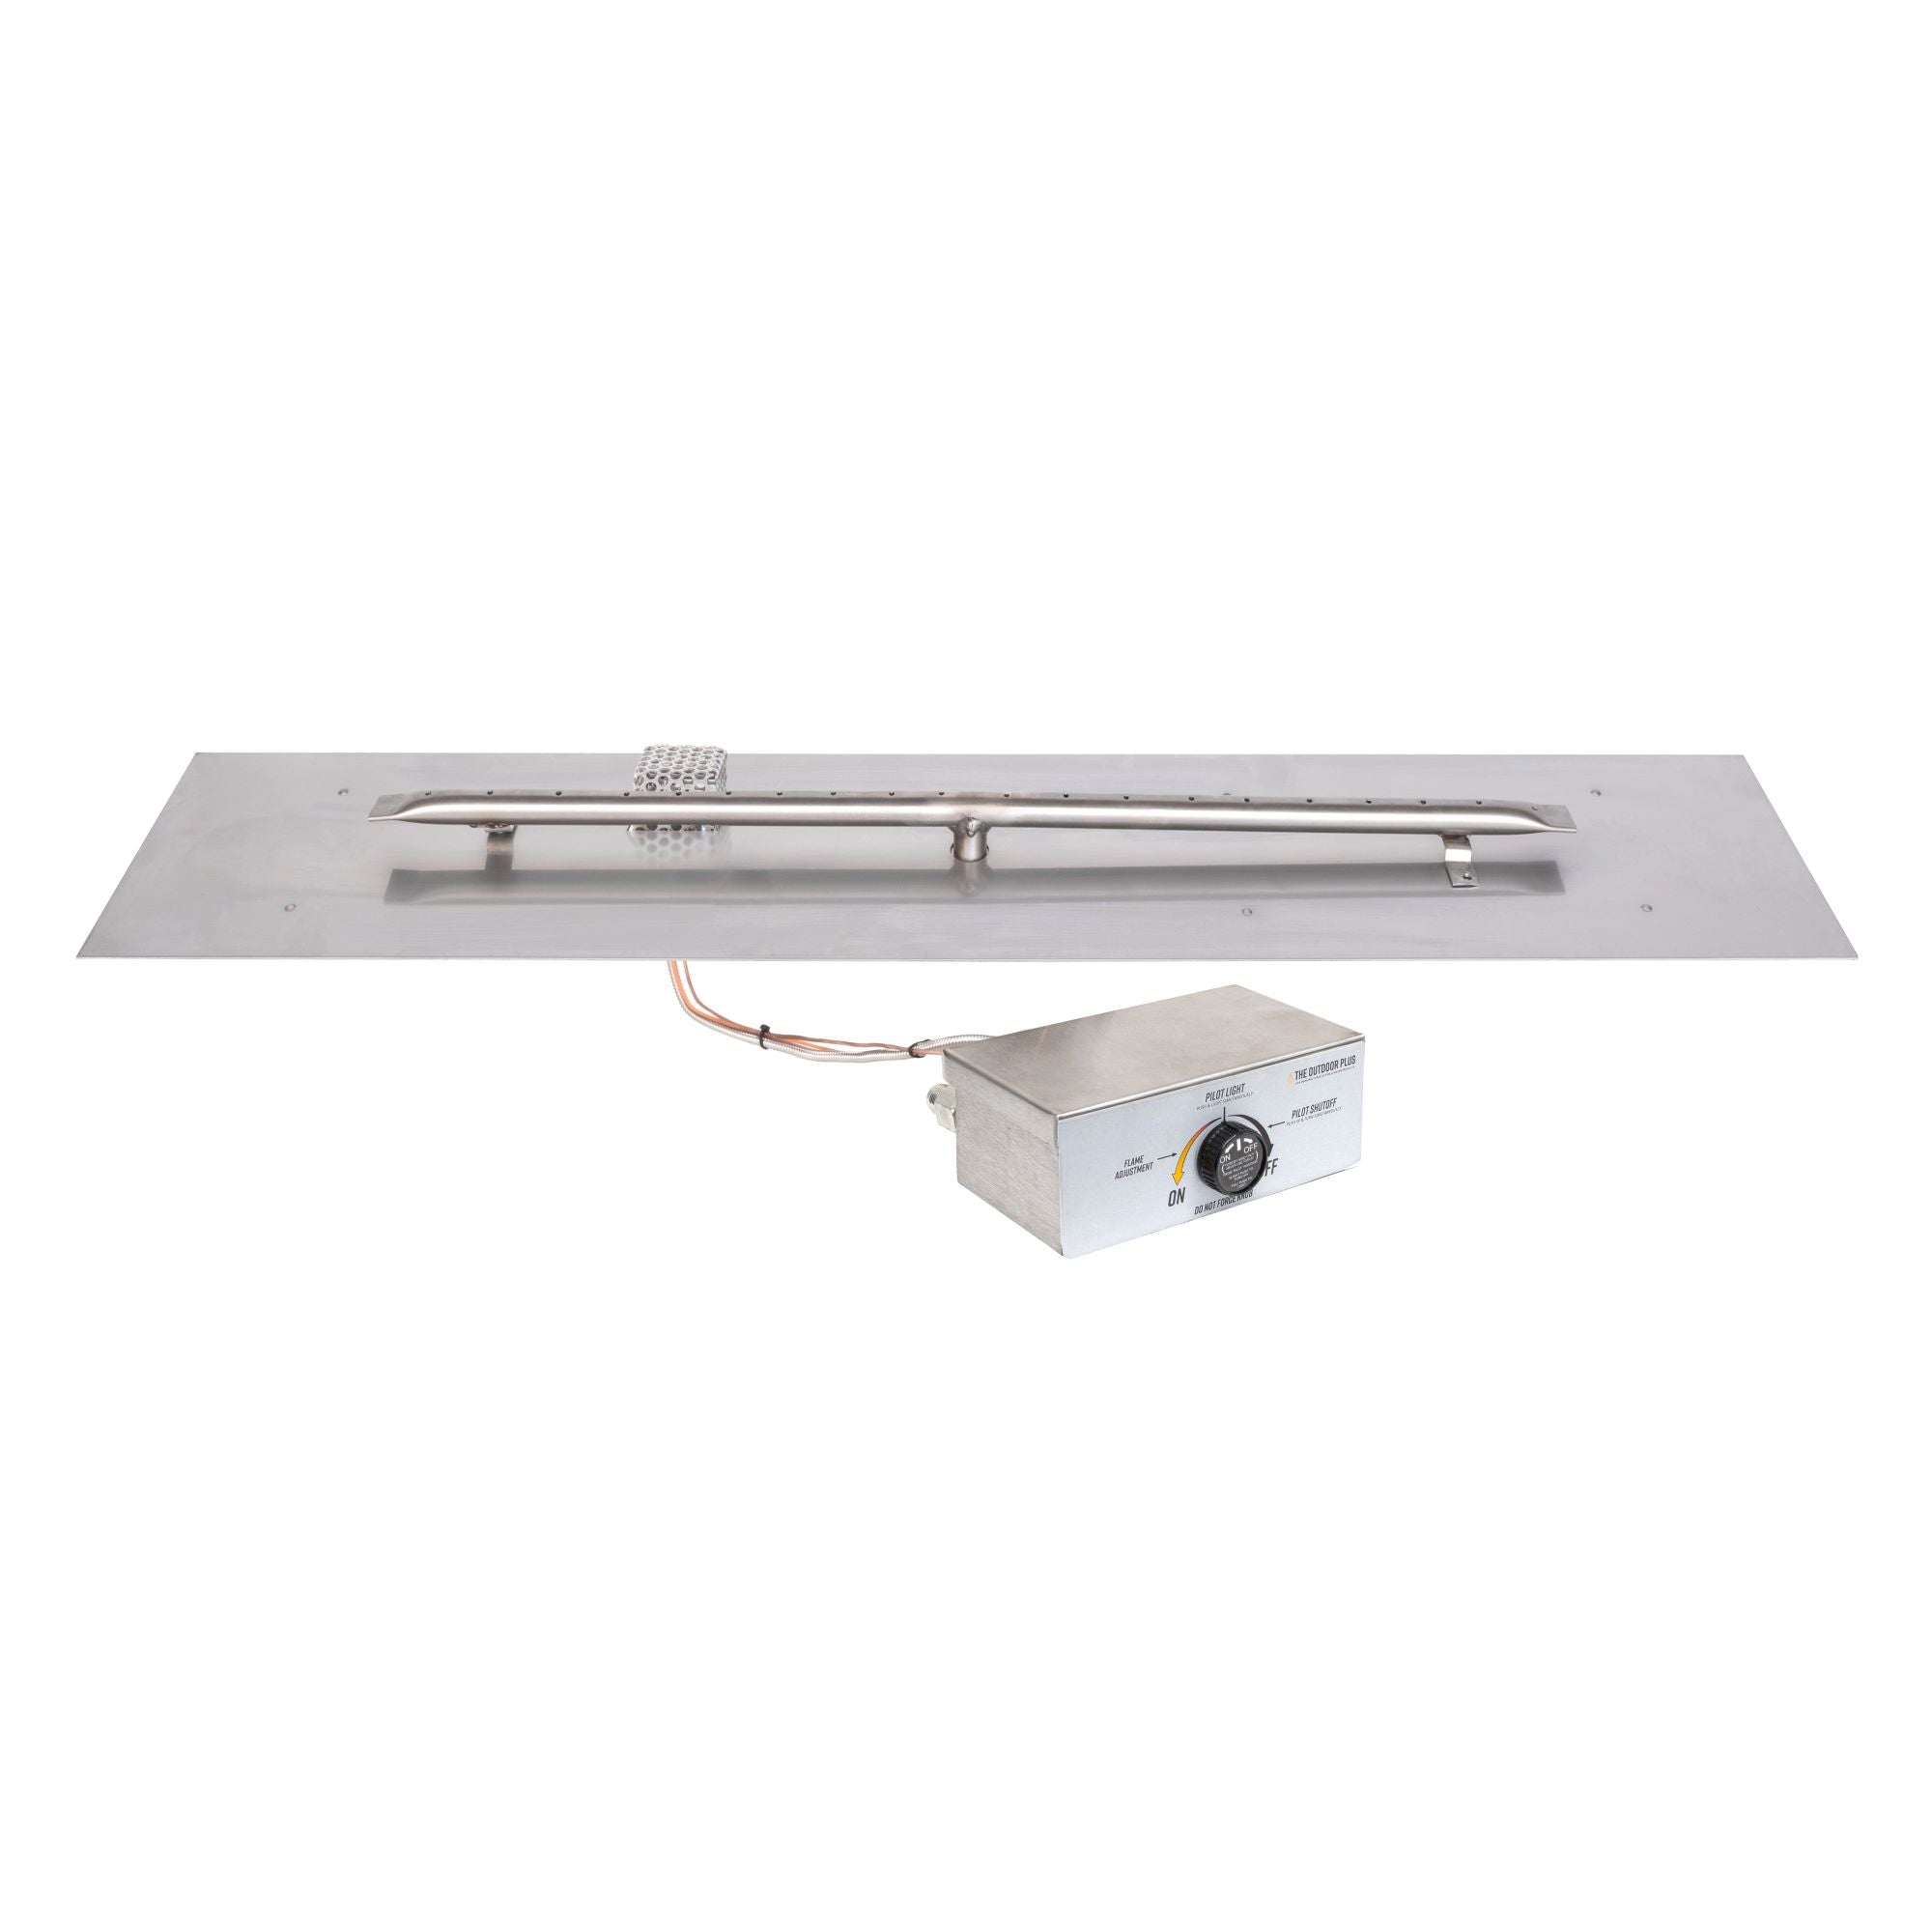 The Outdoor Plus Rectangular Flat Pan 6" with Stainless Steel Linear Burner